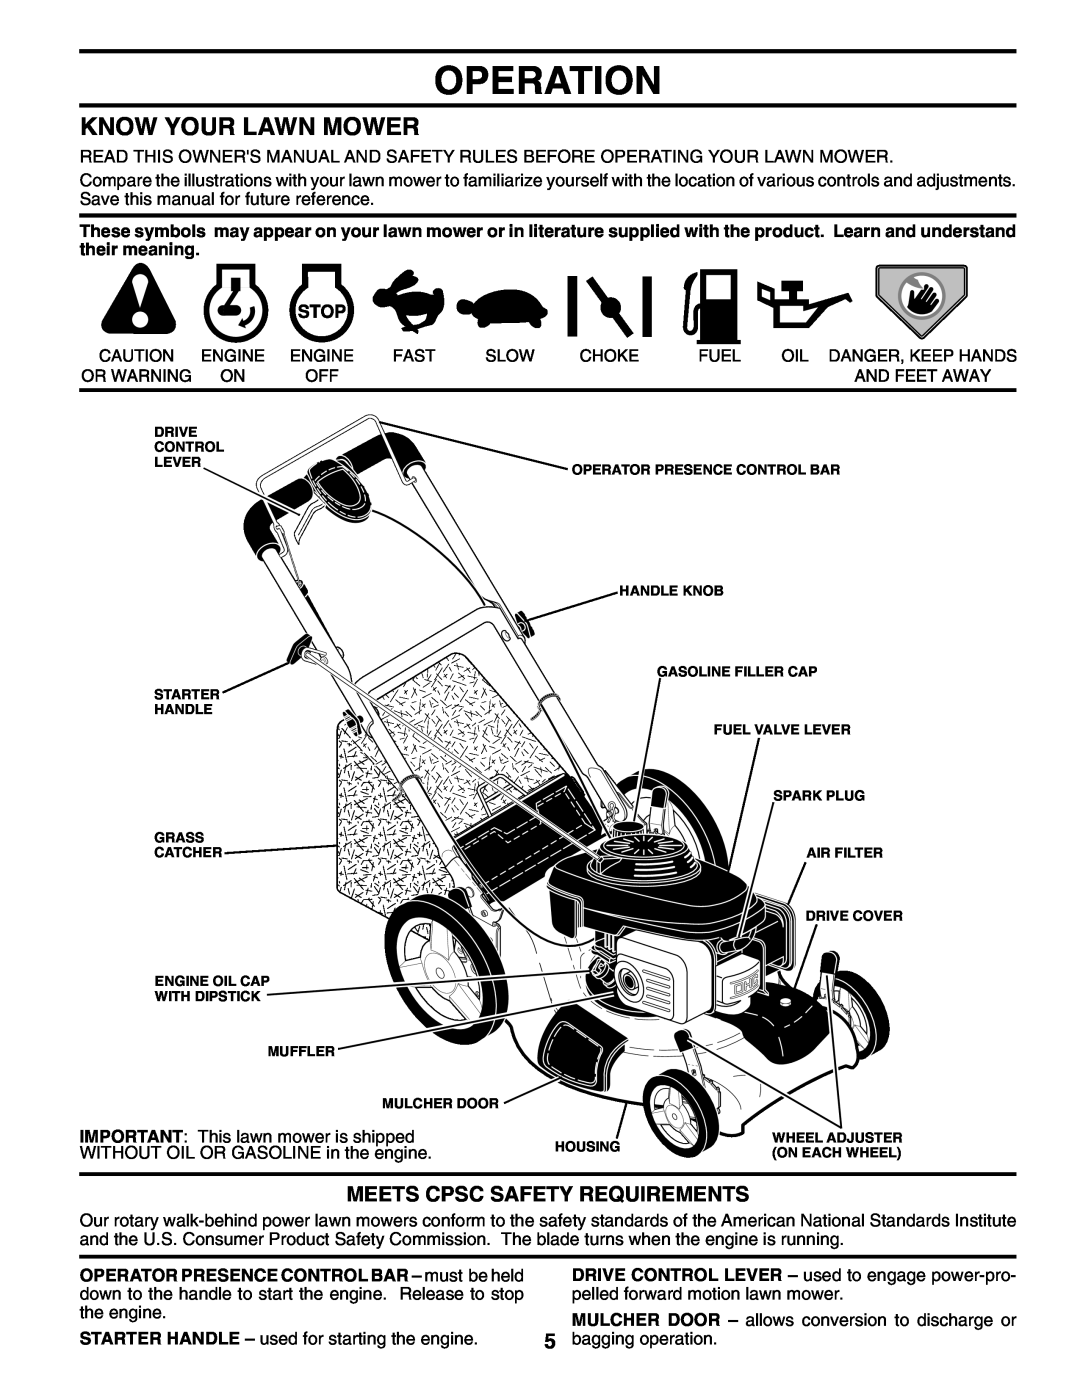 Husqvarna 5521 CHV 96143000106 manual Operation, Know Your Lawn Mower, Meets Cpsc Safety Requirements 